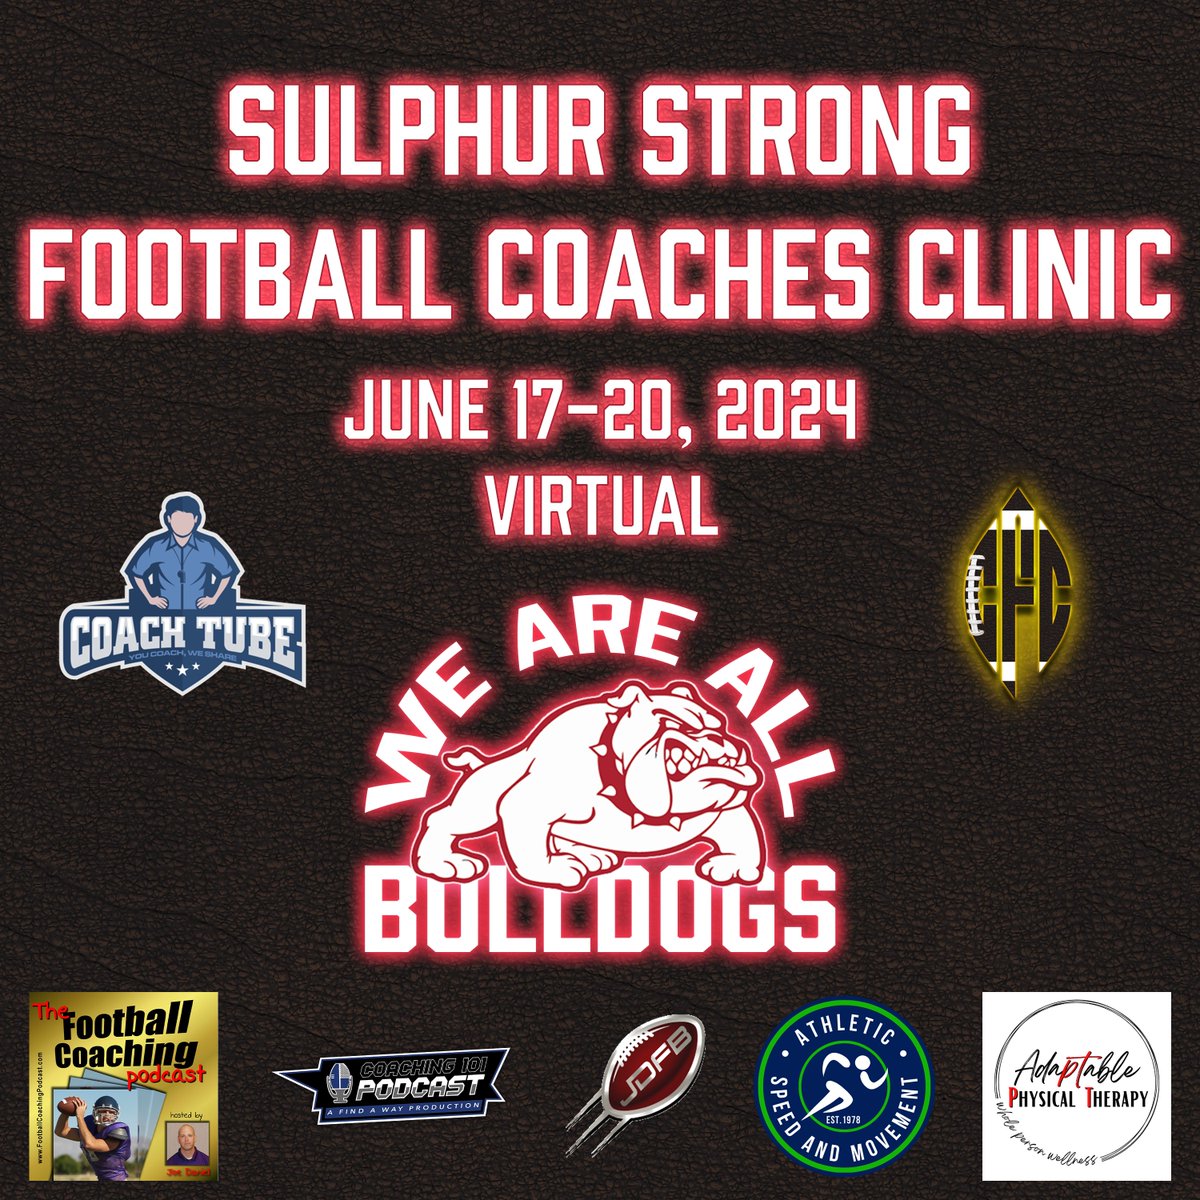 On a night where things have once again gone hectic, we are still putting together the #SulphurStrong Coaches Clinic. I'll be sharing the website tomorrow as we get it updated and ready for registration. I greatly appreciate all the coaches that have reached out thus far, and…